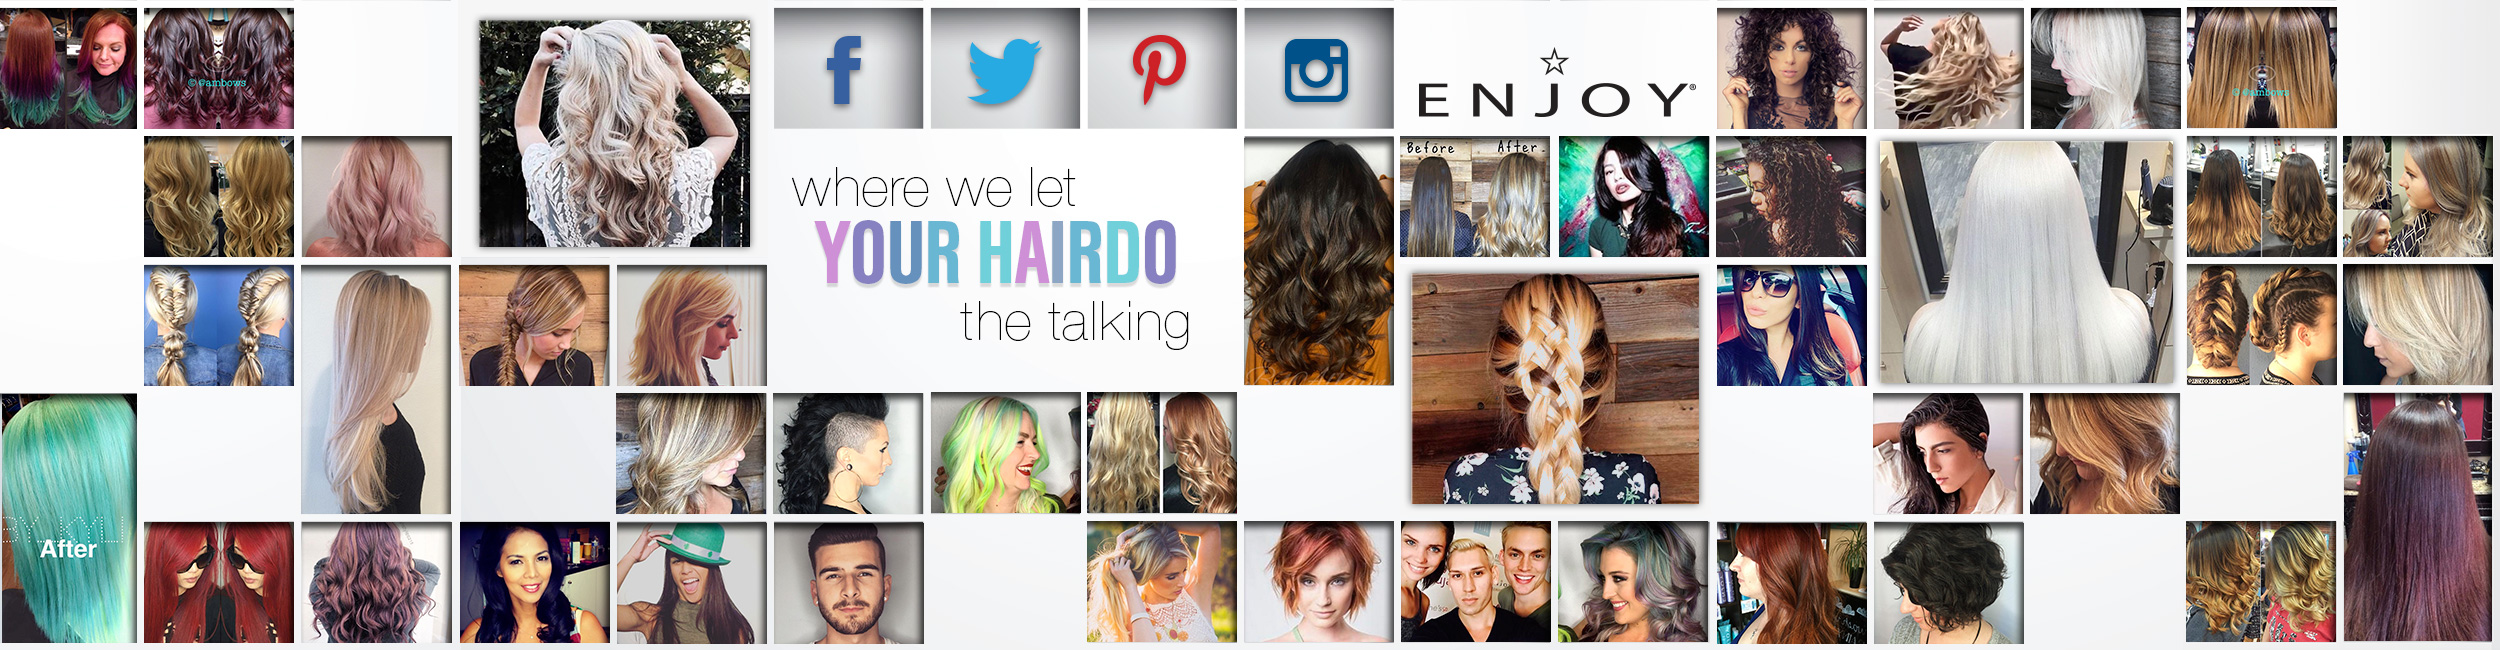 Enjoy Hair Care - Enjoy Professional Hair Care Products